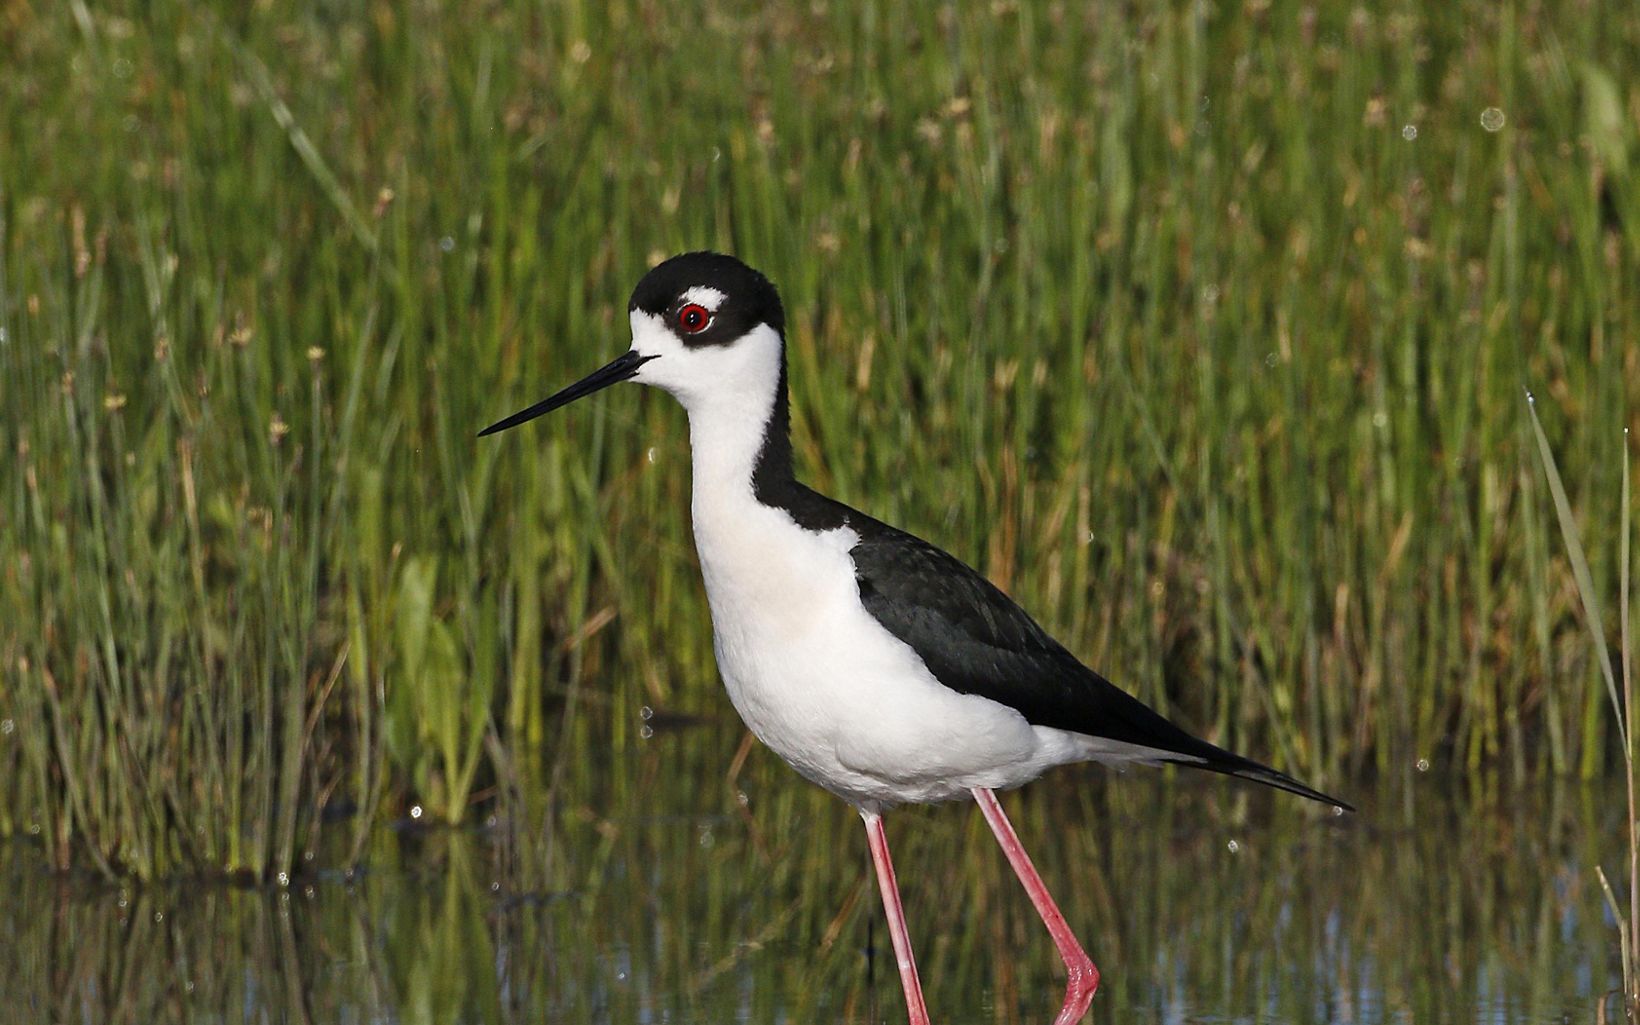 Black-necked Stilt Black-necked stilts are large shorebirds that walks just as if it was on stilts. They are a rare migrant at Cheyenne Bottoms but numbers are slowly increasing. © Tom Blandford